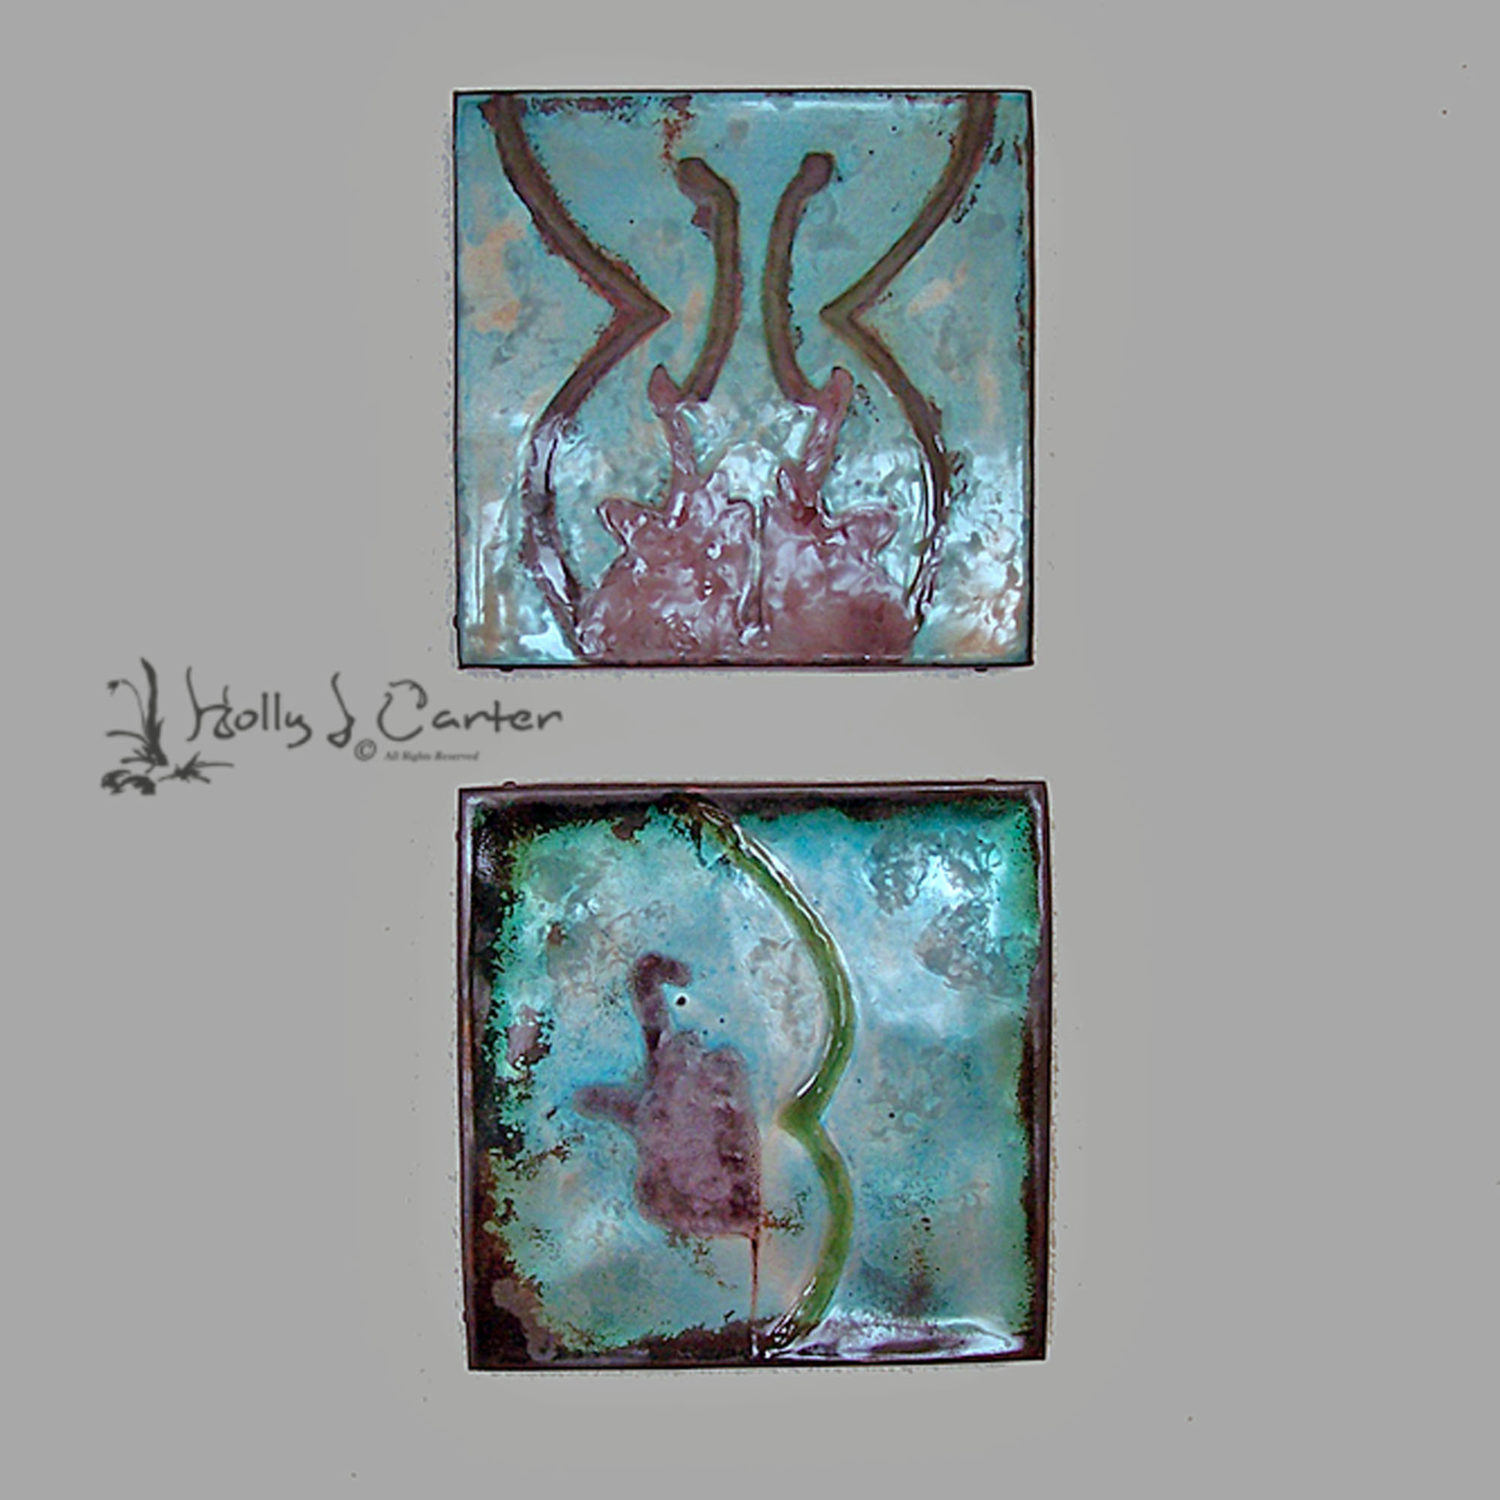 Abstract Enameled Wall Art Pieces Set of 2 handcrafted by Holly J Carter